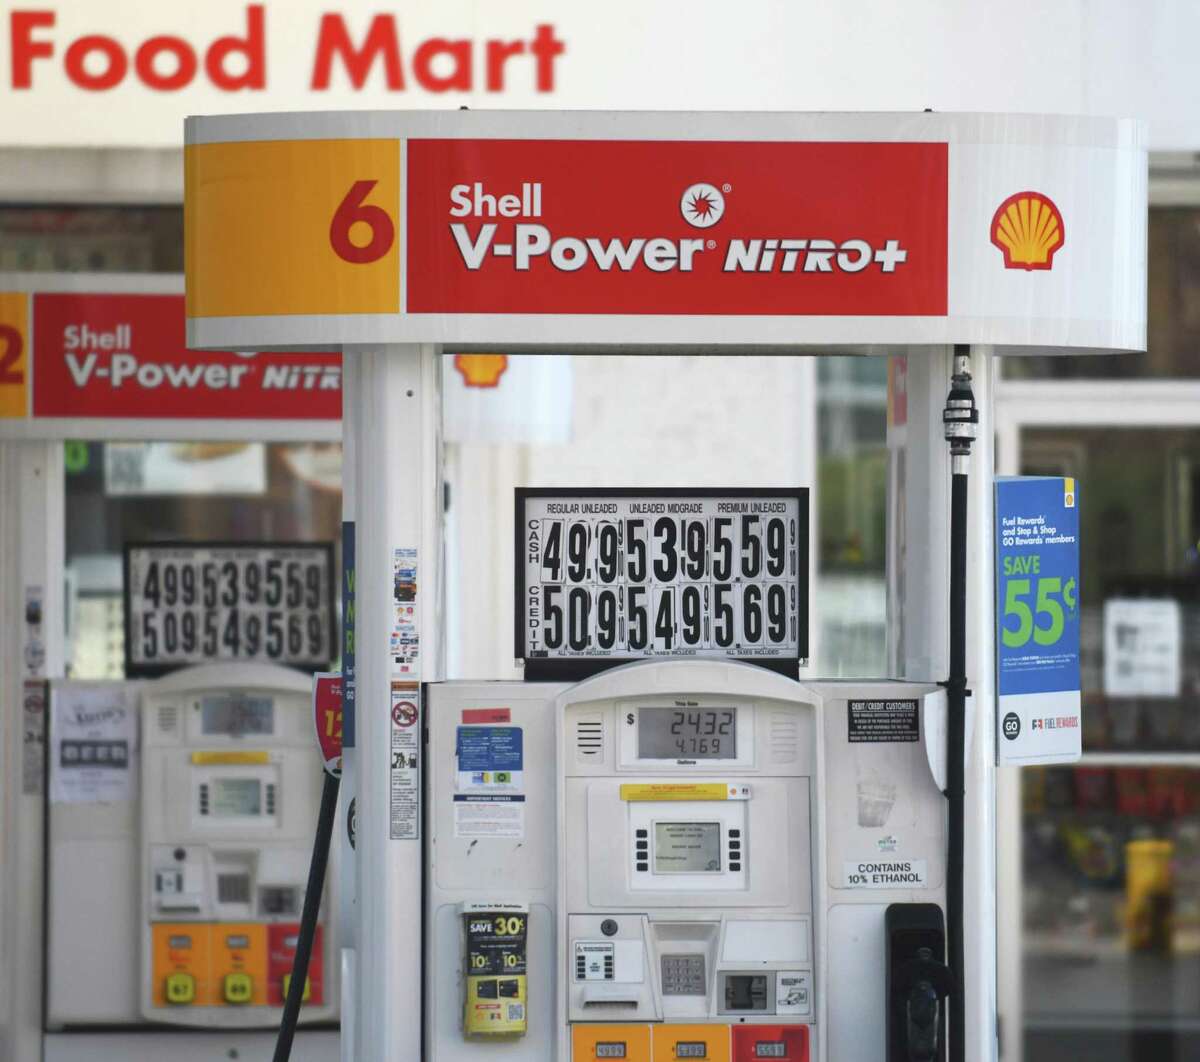 Regular unleaded gas is sold for $4.99 per gallon at the West Broad Street Shell station in Stamford, Conn. in an April 2022 file photo. The average price for a gallon of regular gas in Connecticut now is $3.28 per gallon.